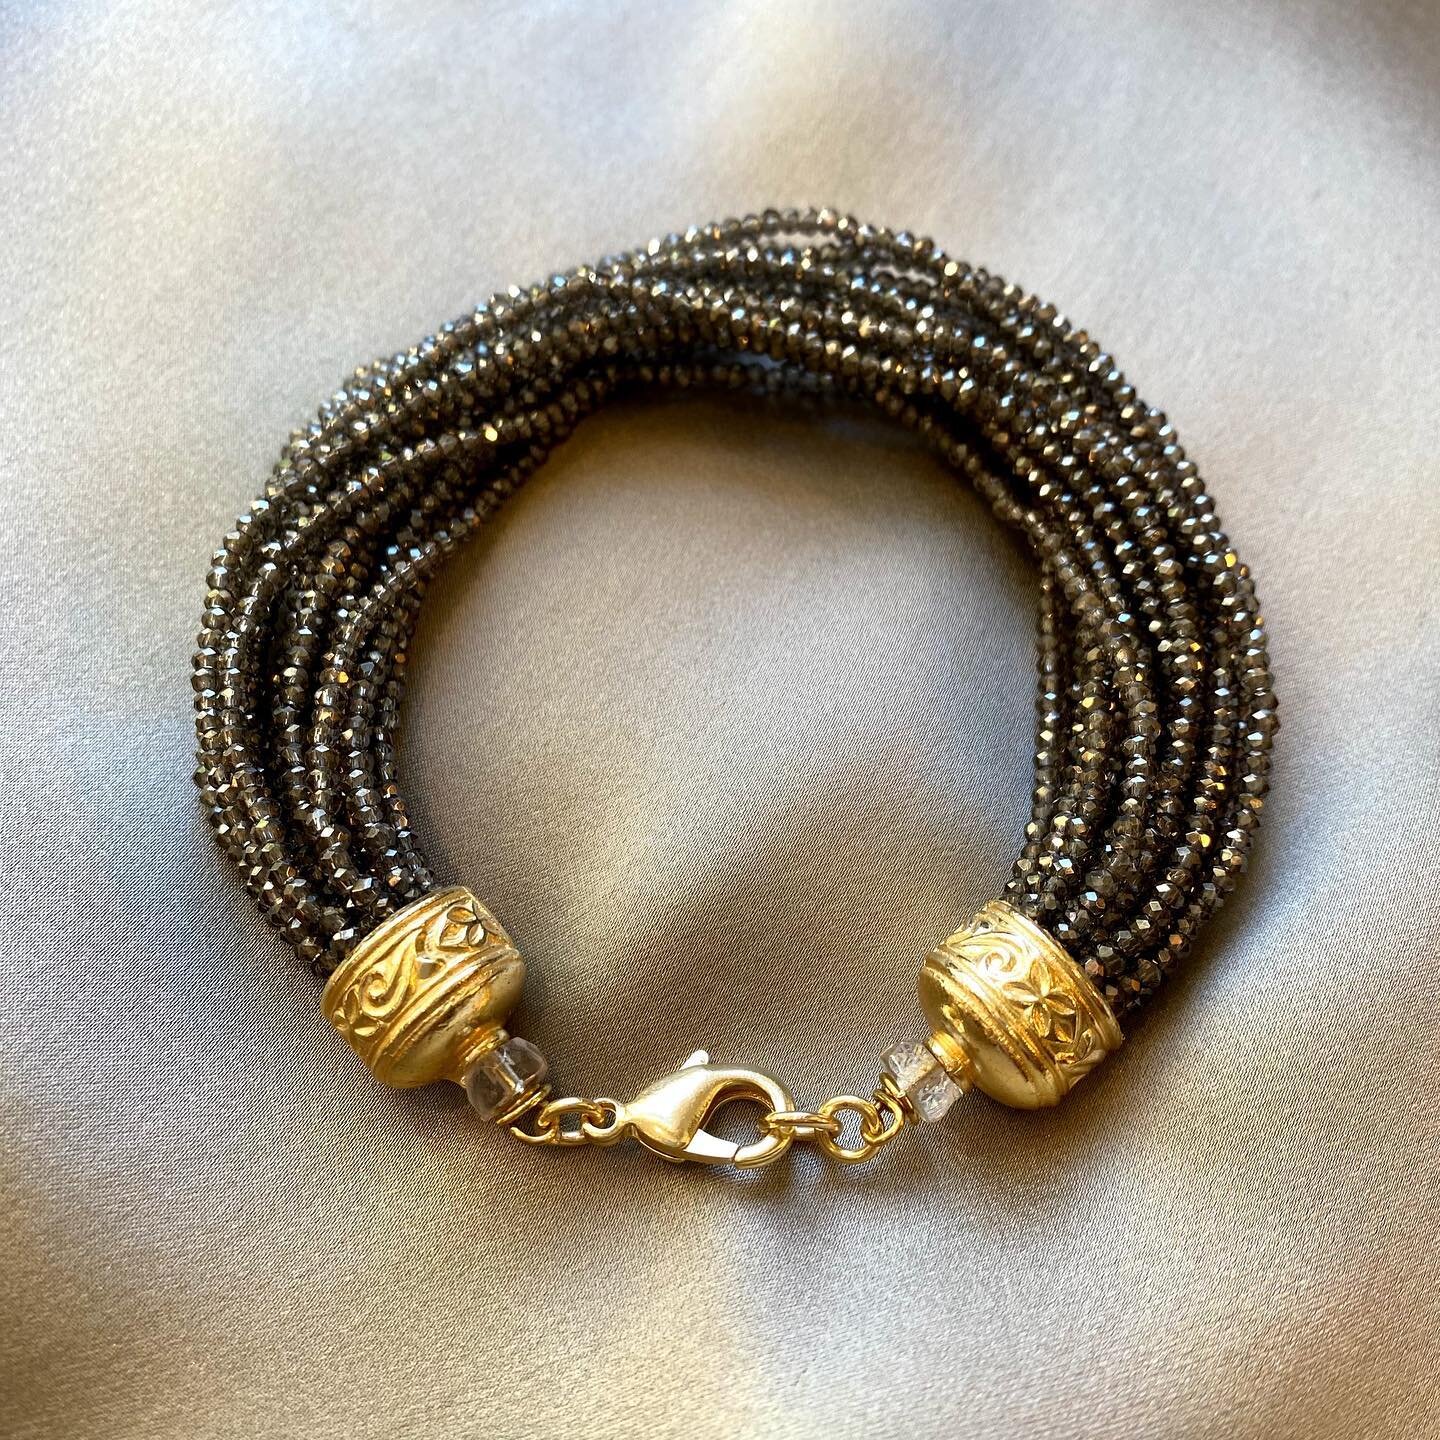 Just had to post this bracelet!  This is a new design for me and I loved making it! Yes, those are lots of tiny micro faceted crystals but so worth the time to create this beauty. One of akind and lovely. Available at @alexanderscottinteriors in Char